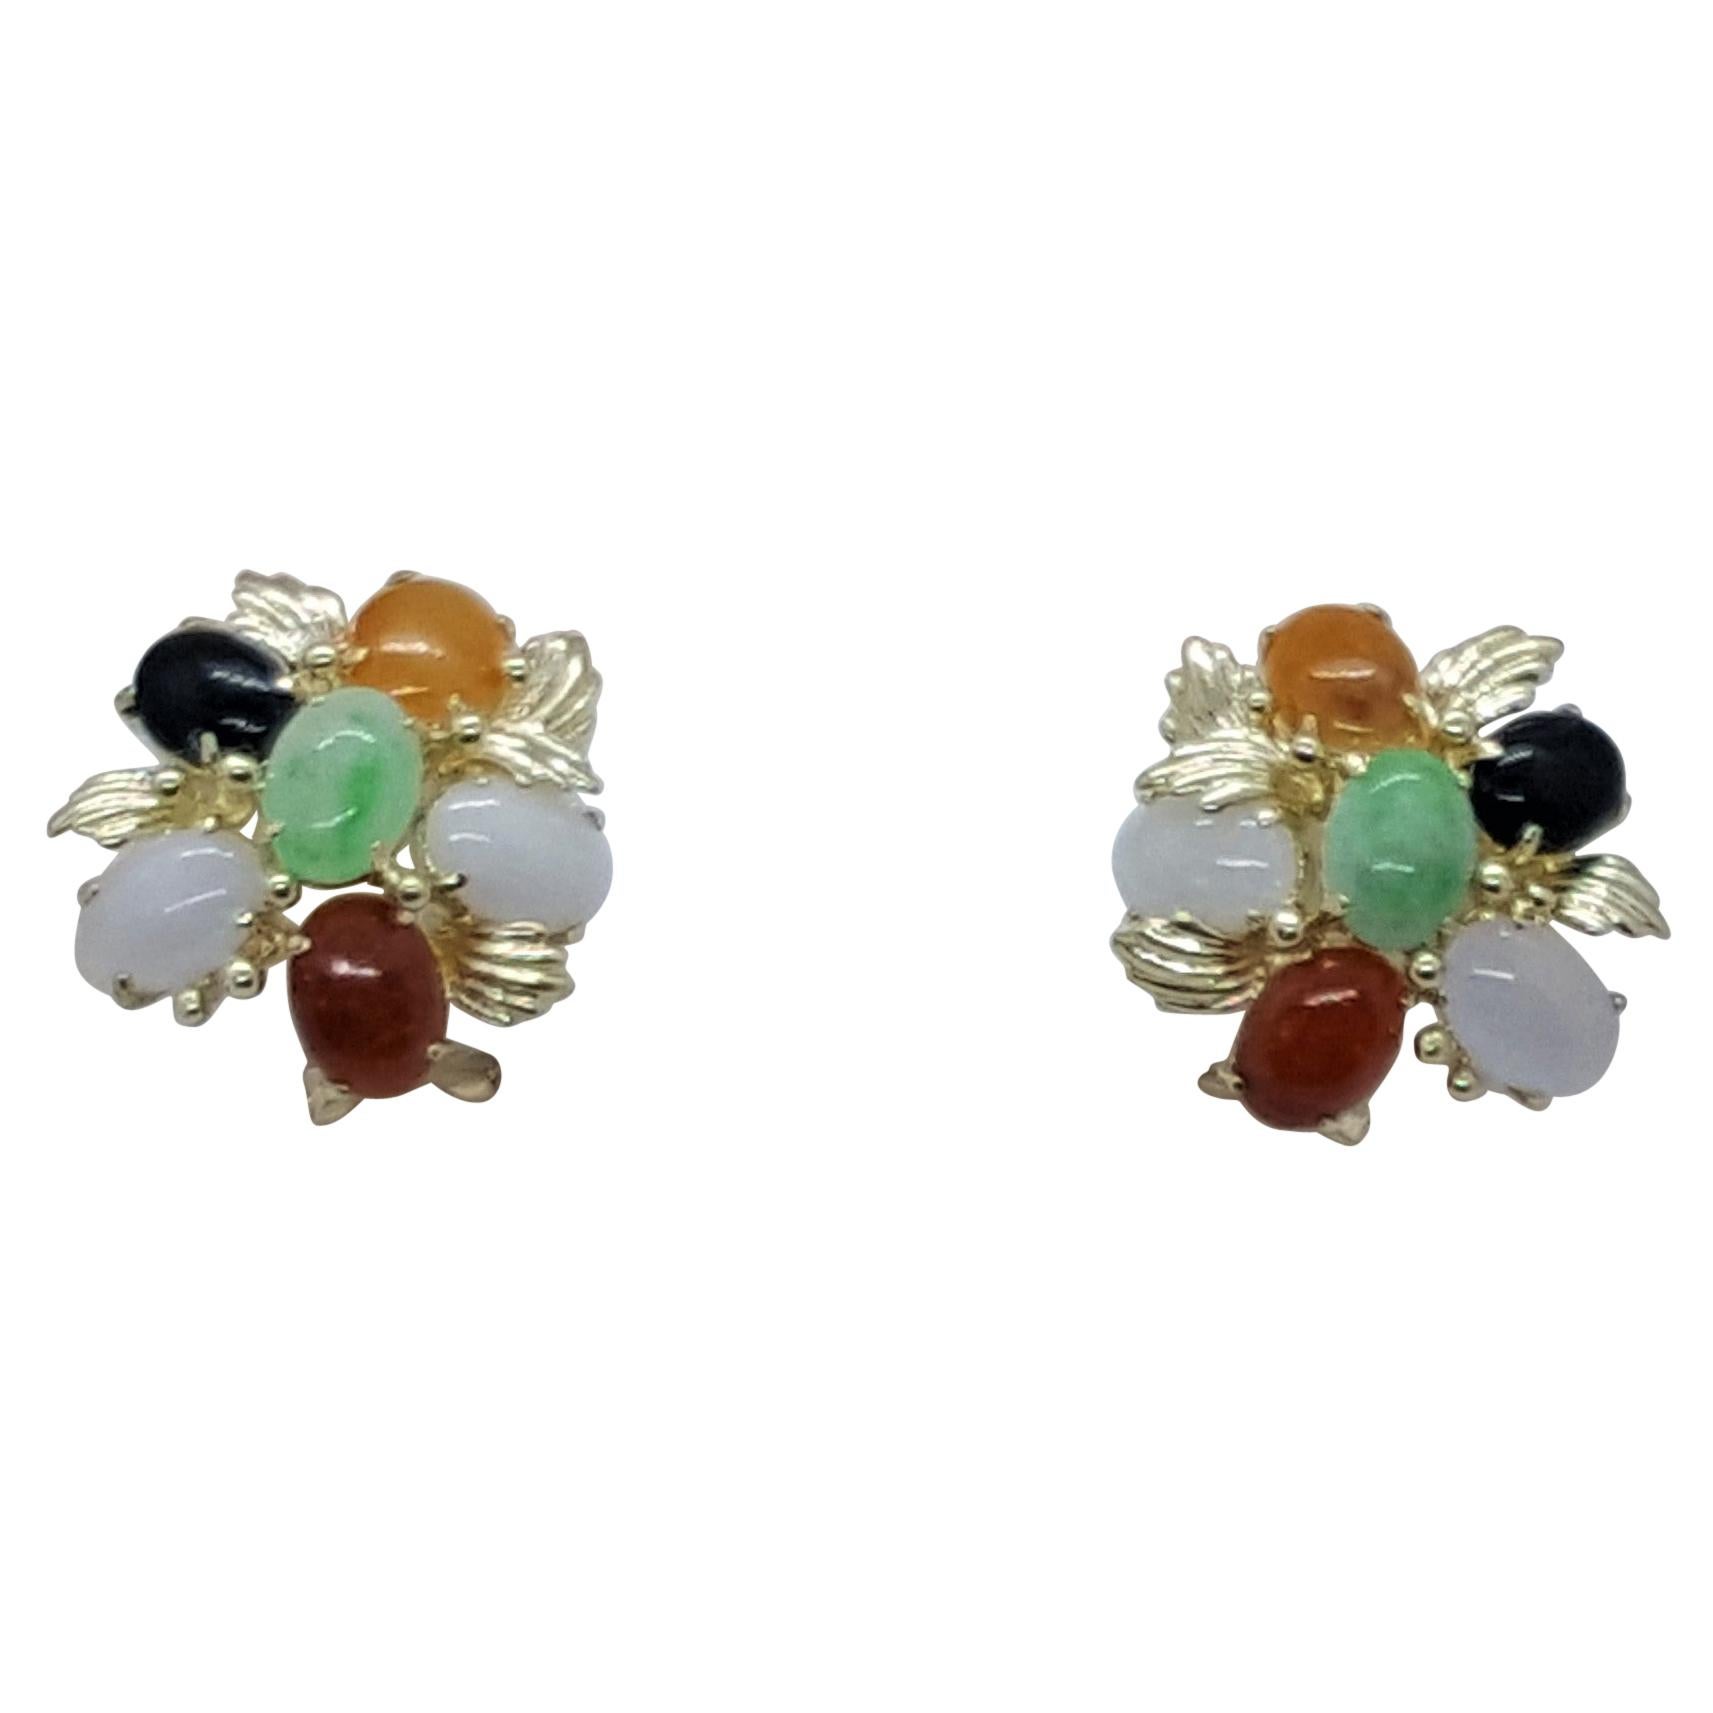 14kt Yellow Gold Multi-Colored Jade Earrings Friction Posts with Omega Backings